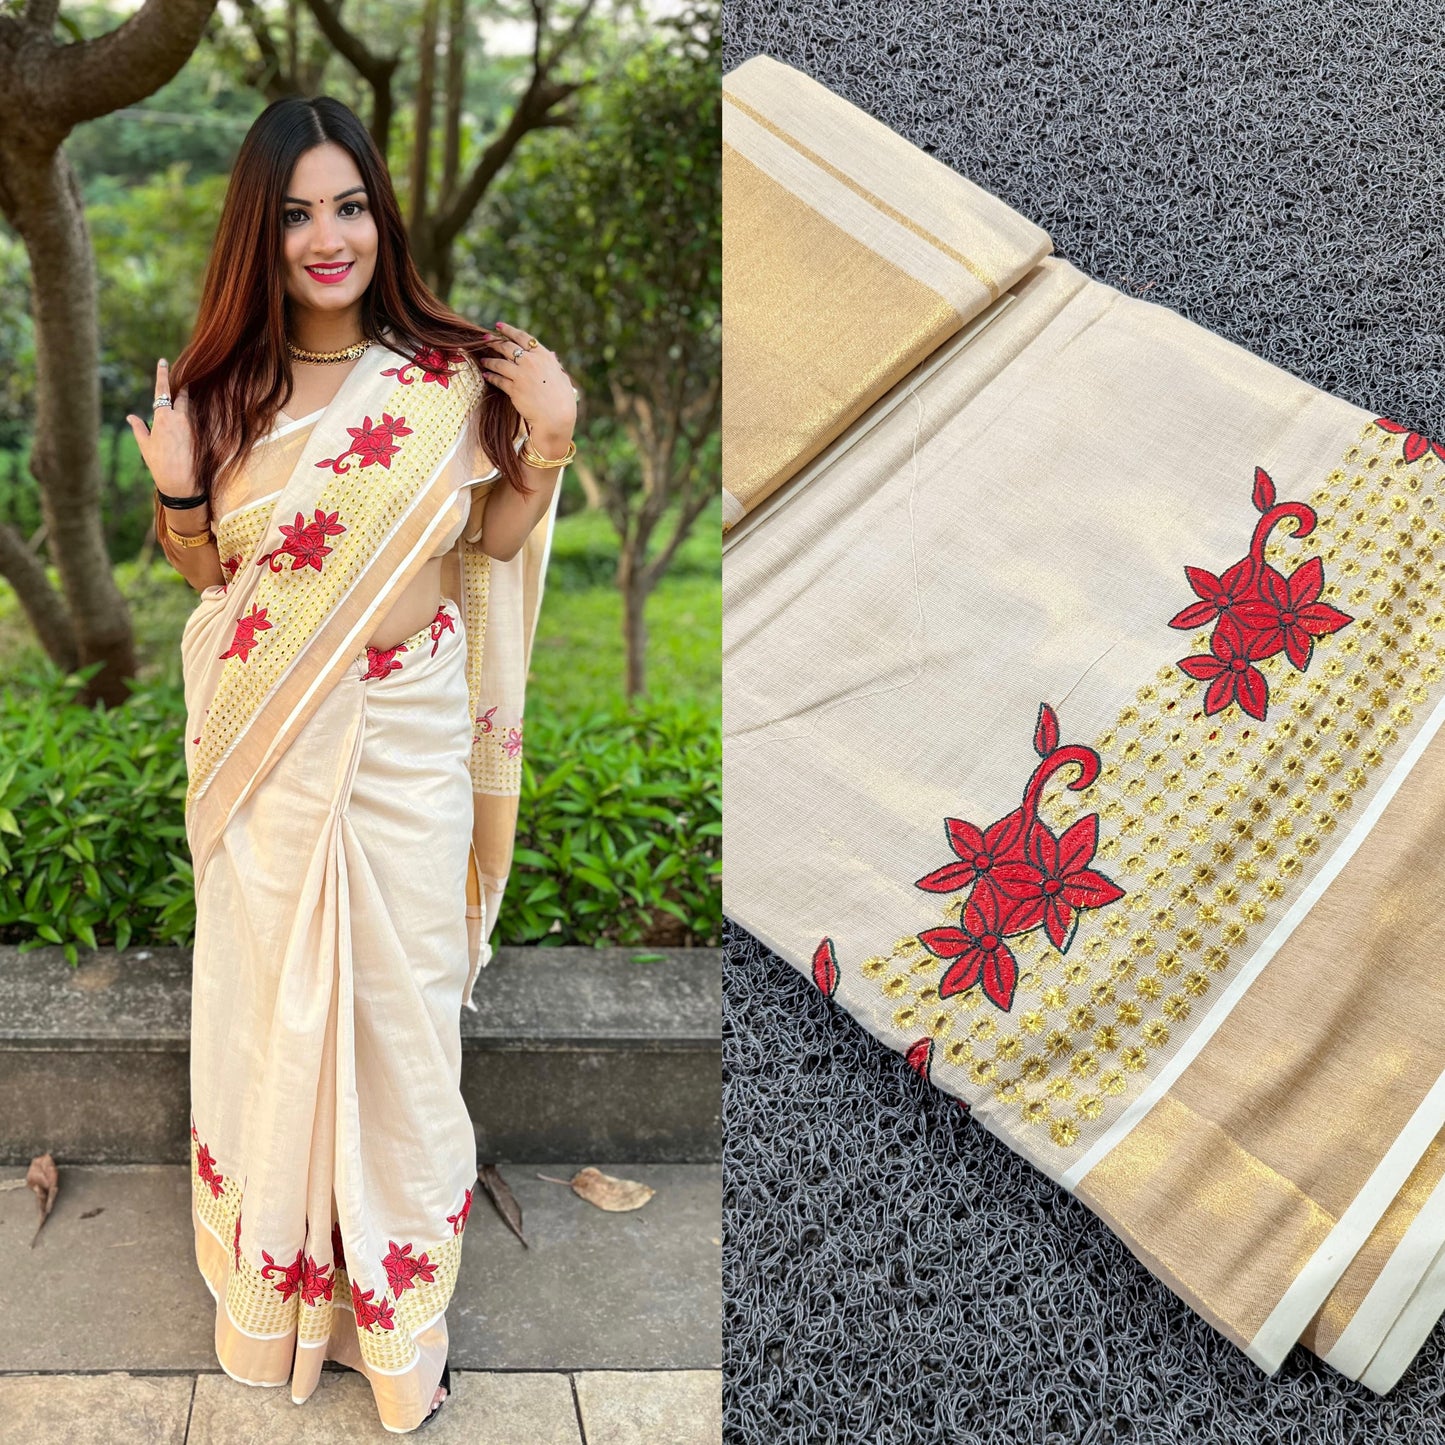 Kerala Tissue Kasavu Saree with Red Embroidery and Cutwork Design